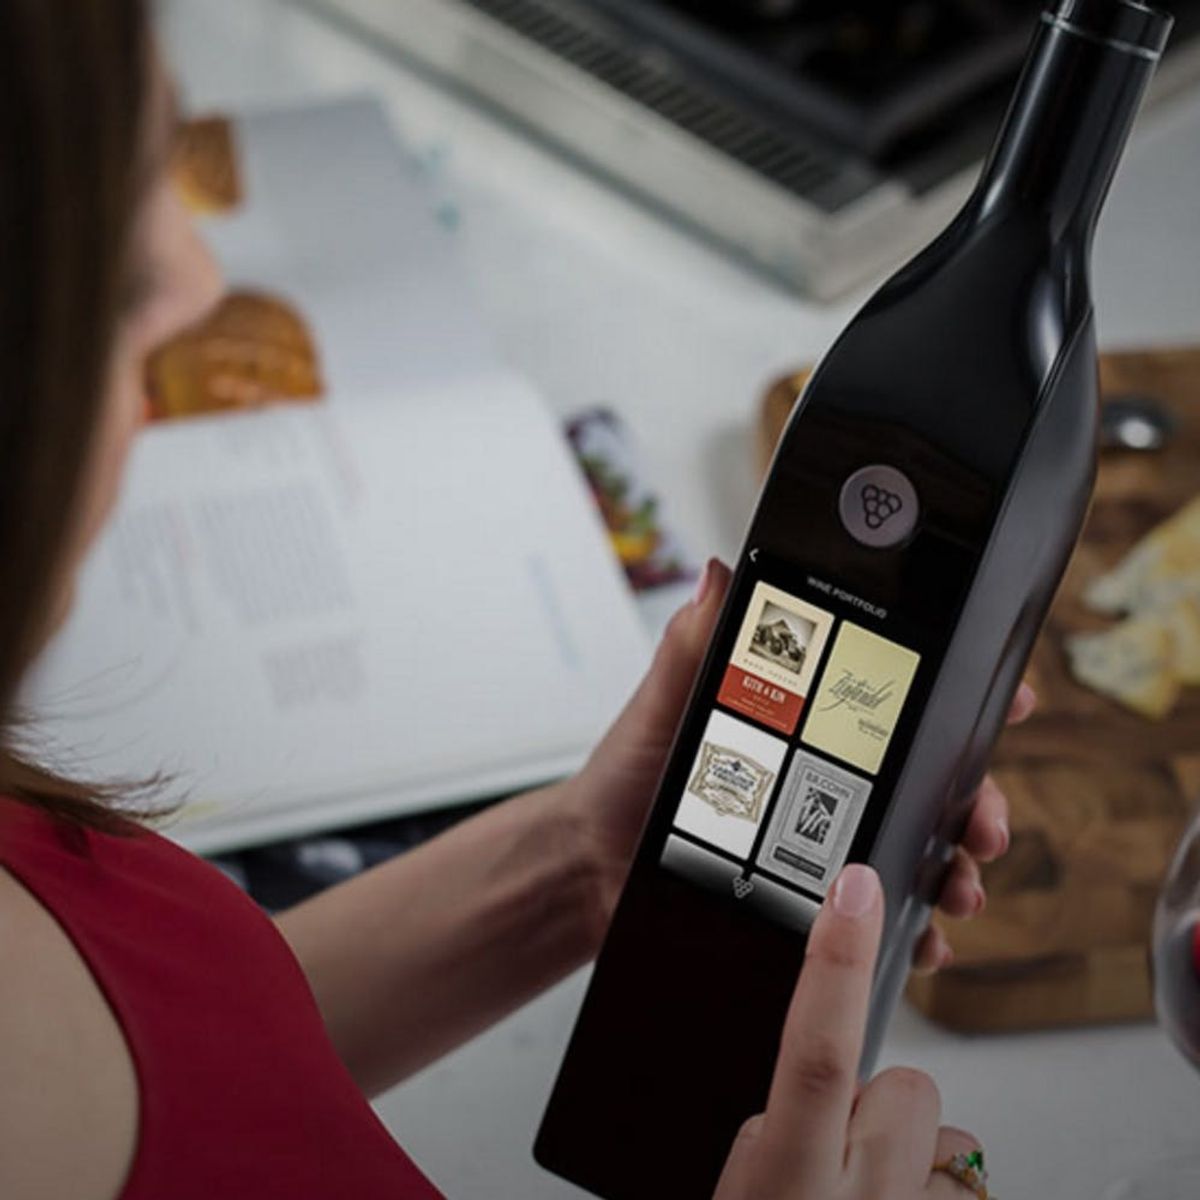 This Smart Wine Bottle Makes Getting Tipsy Totally Techy